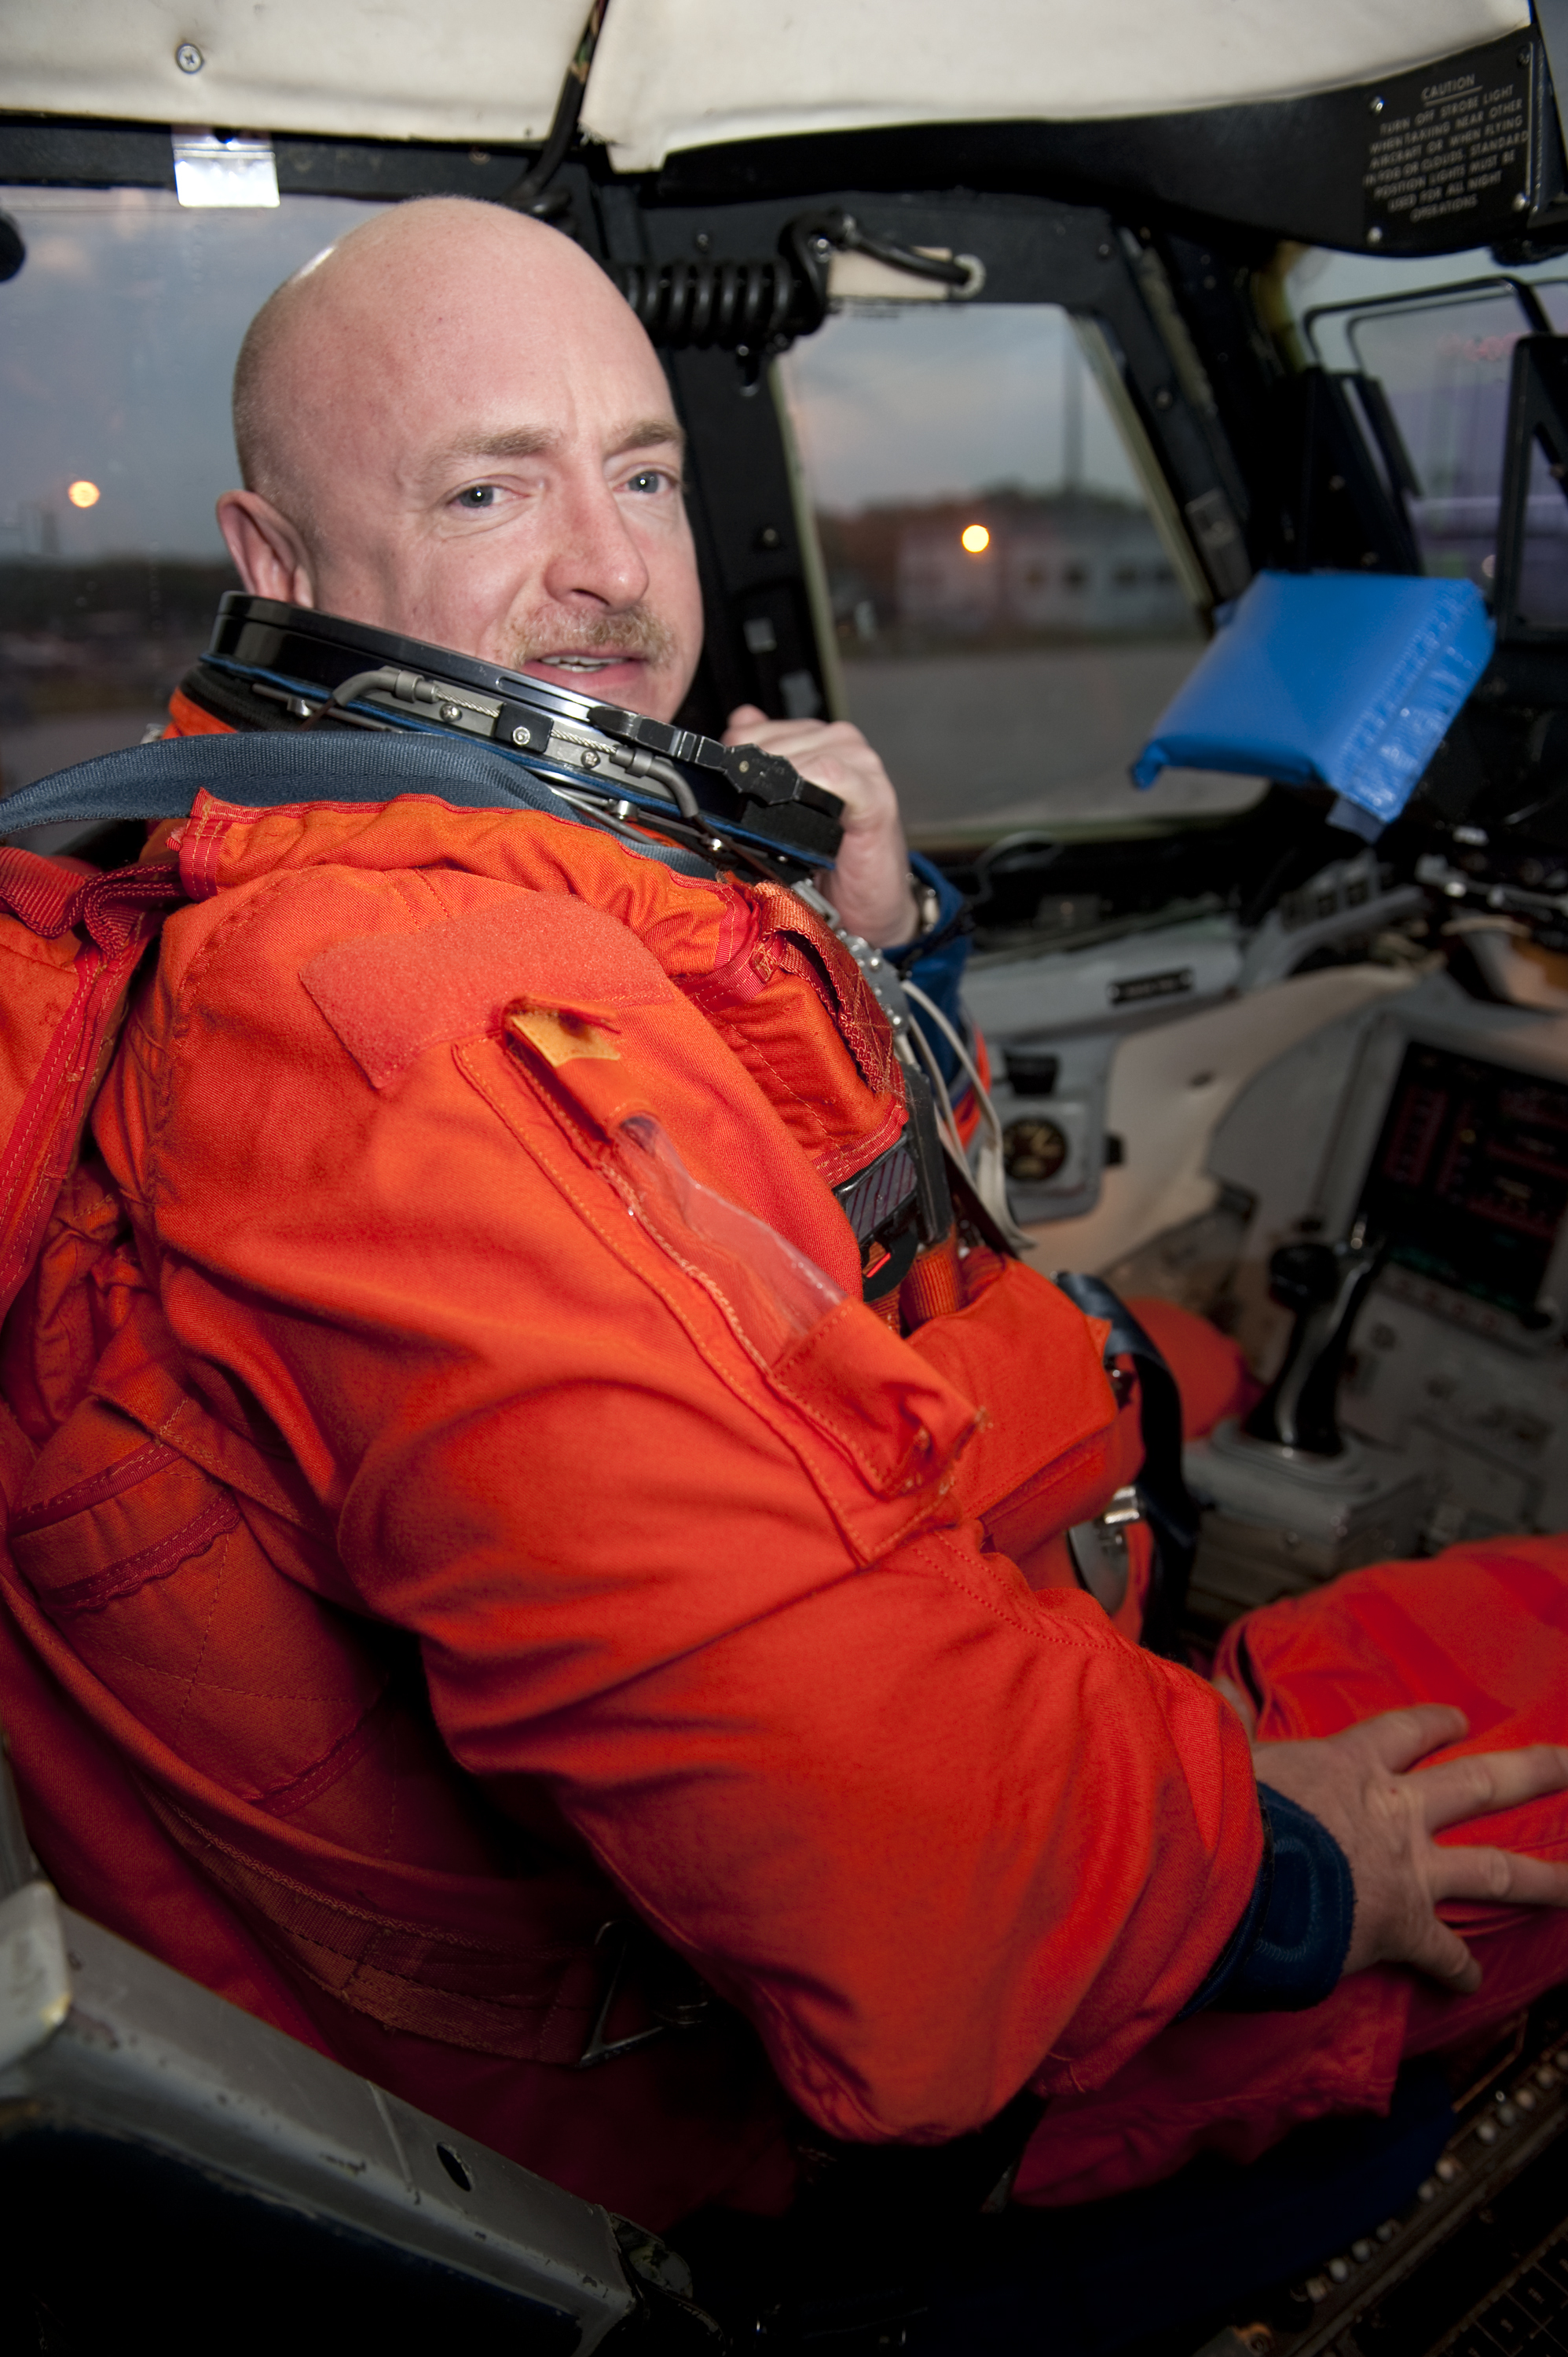 STS-134 Mark Kelly in the Shuttle Training Aircraft